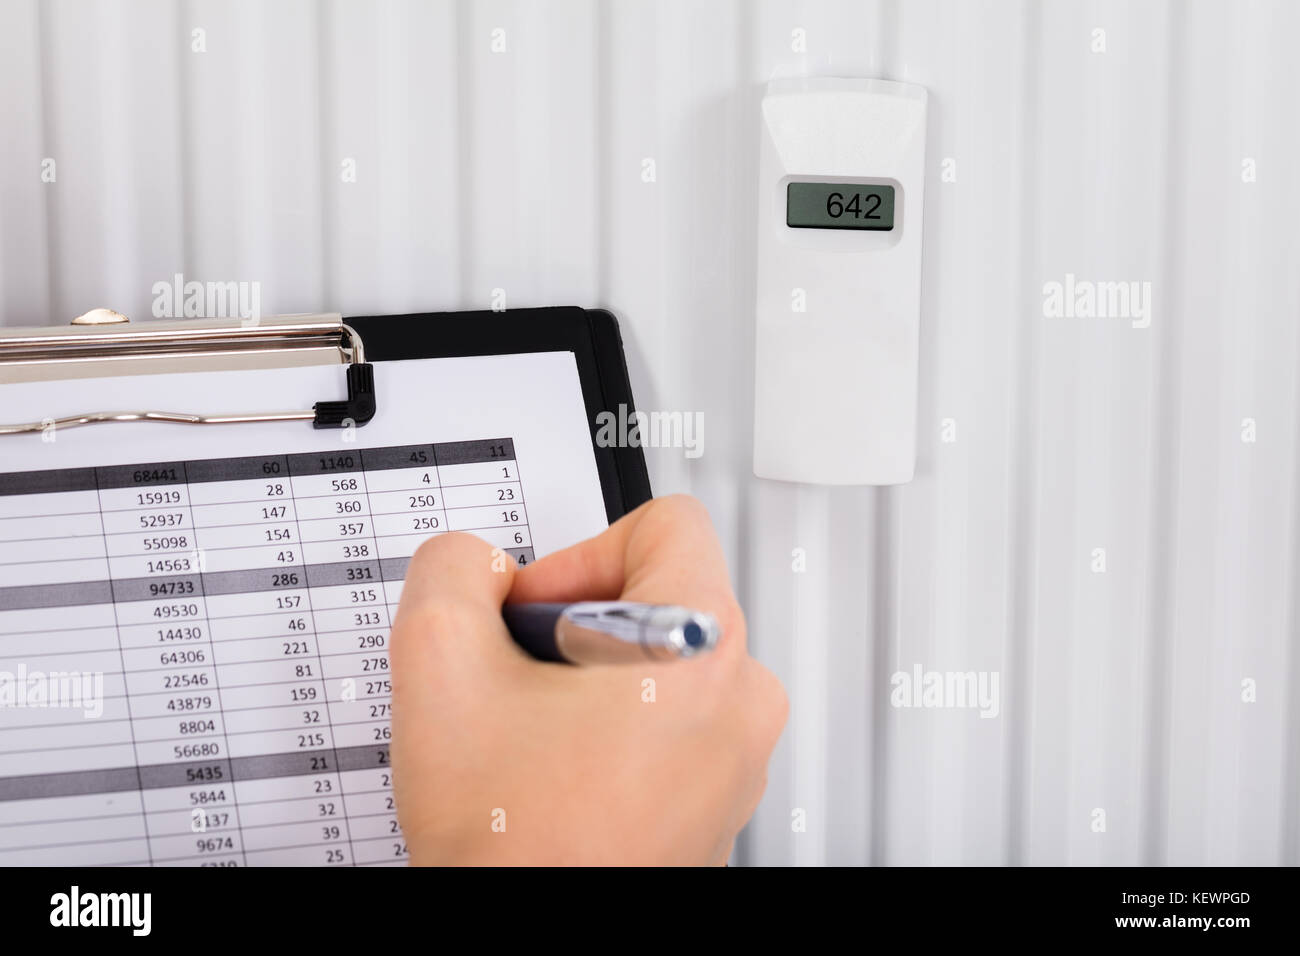 Person Hand Maintaining Records Of Digital Thermostat On Clipboard At Home Stock Photo